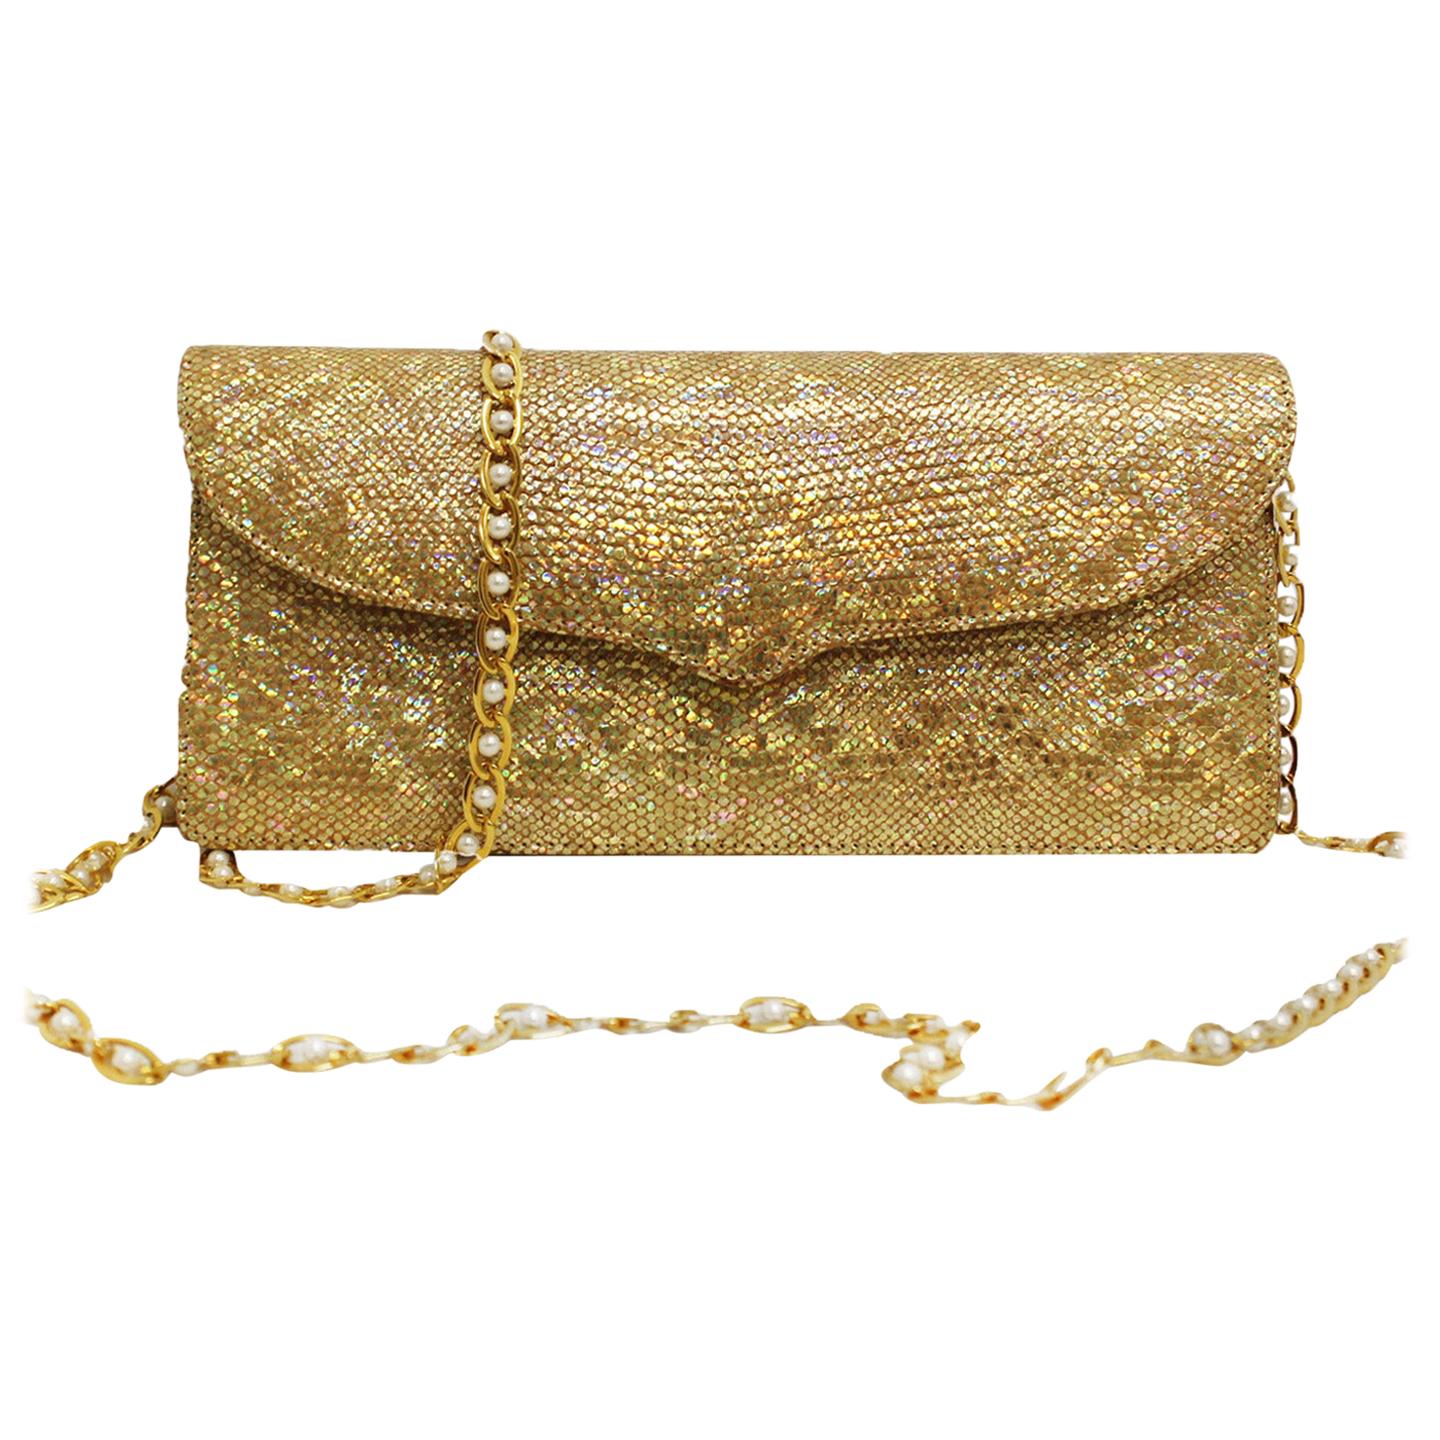 Luscious Lana Marks Gold Glitter Clutch with Gold Tone and Faux Pearl Chain